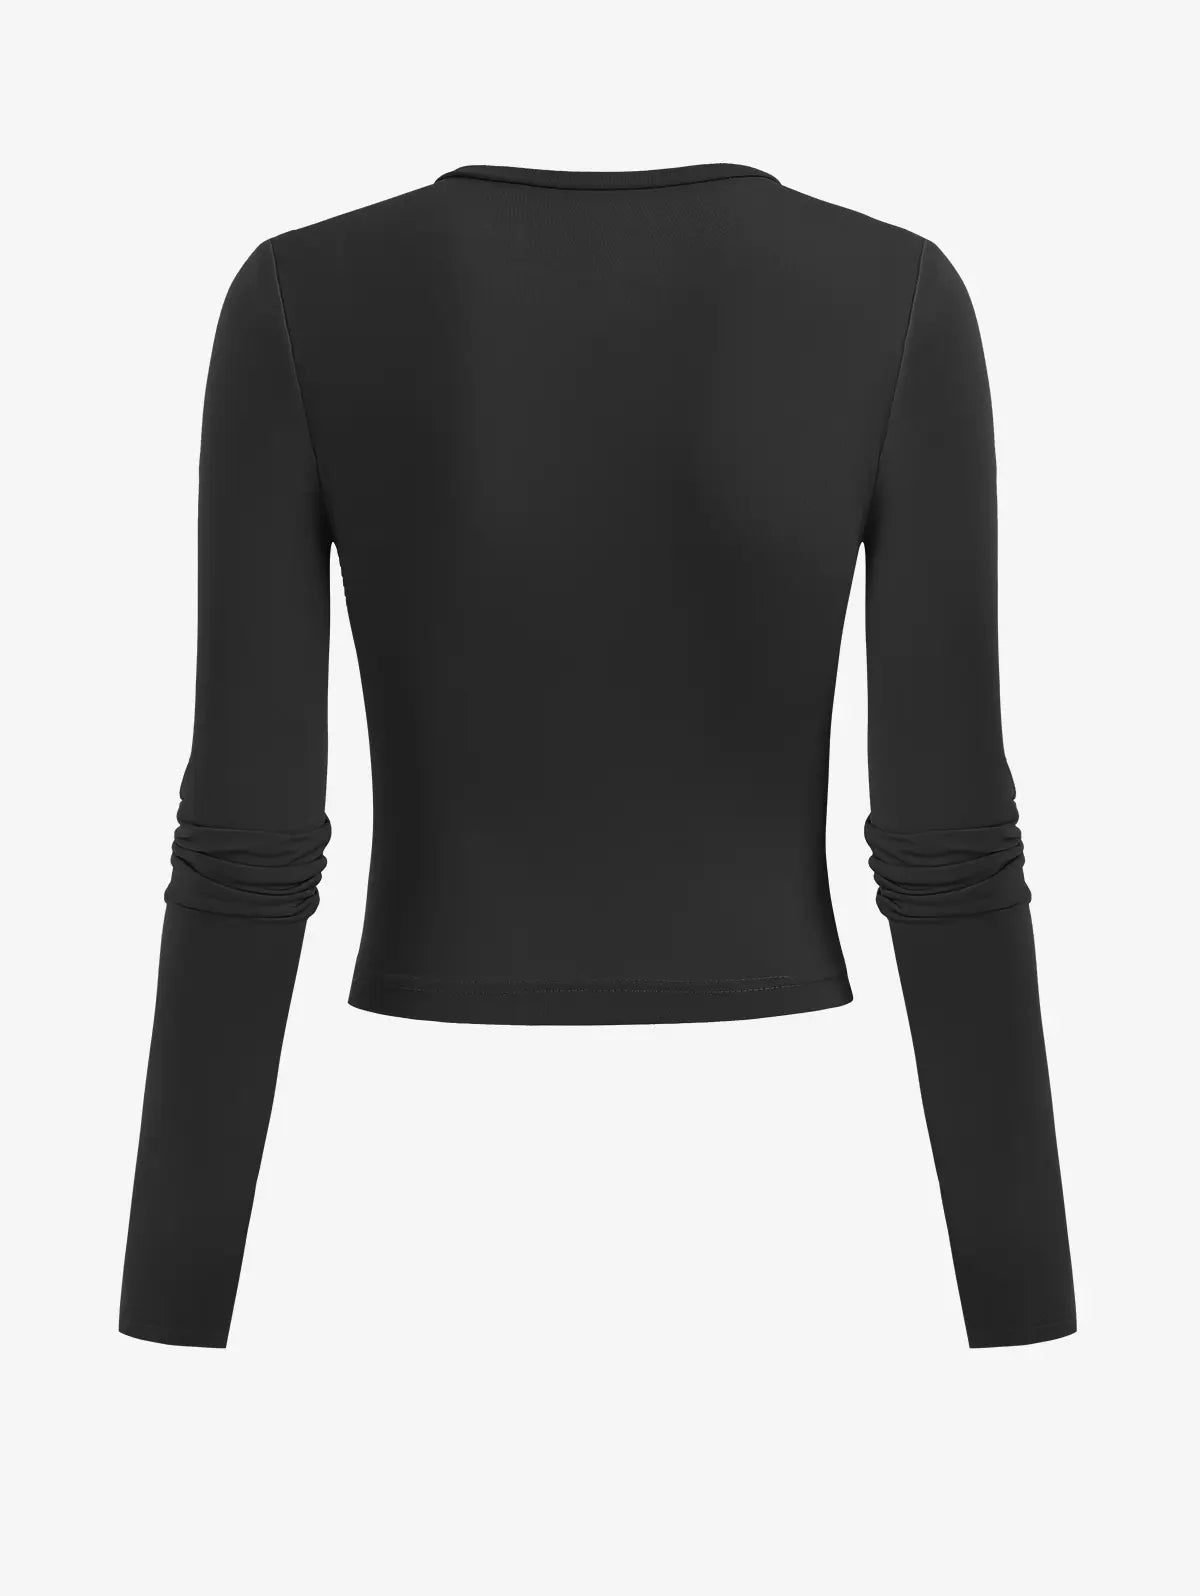 Solid Color Slim Round Collar Long Sleeves Top